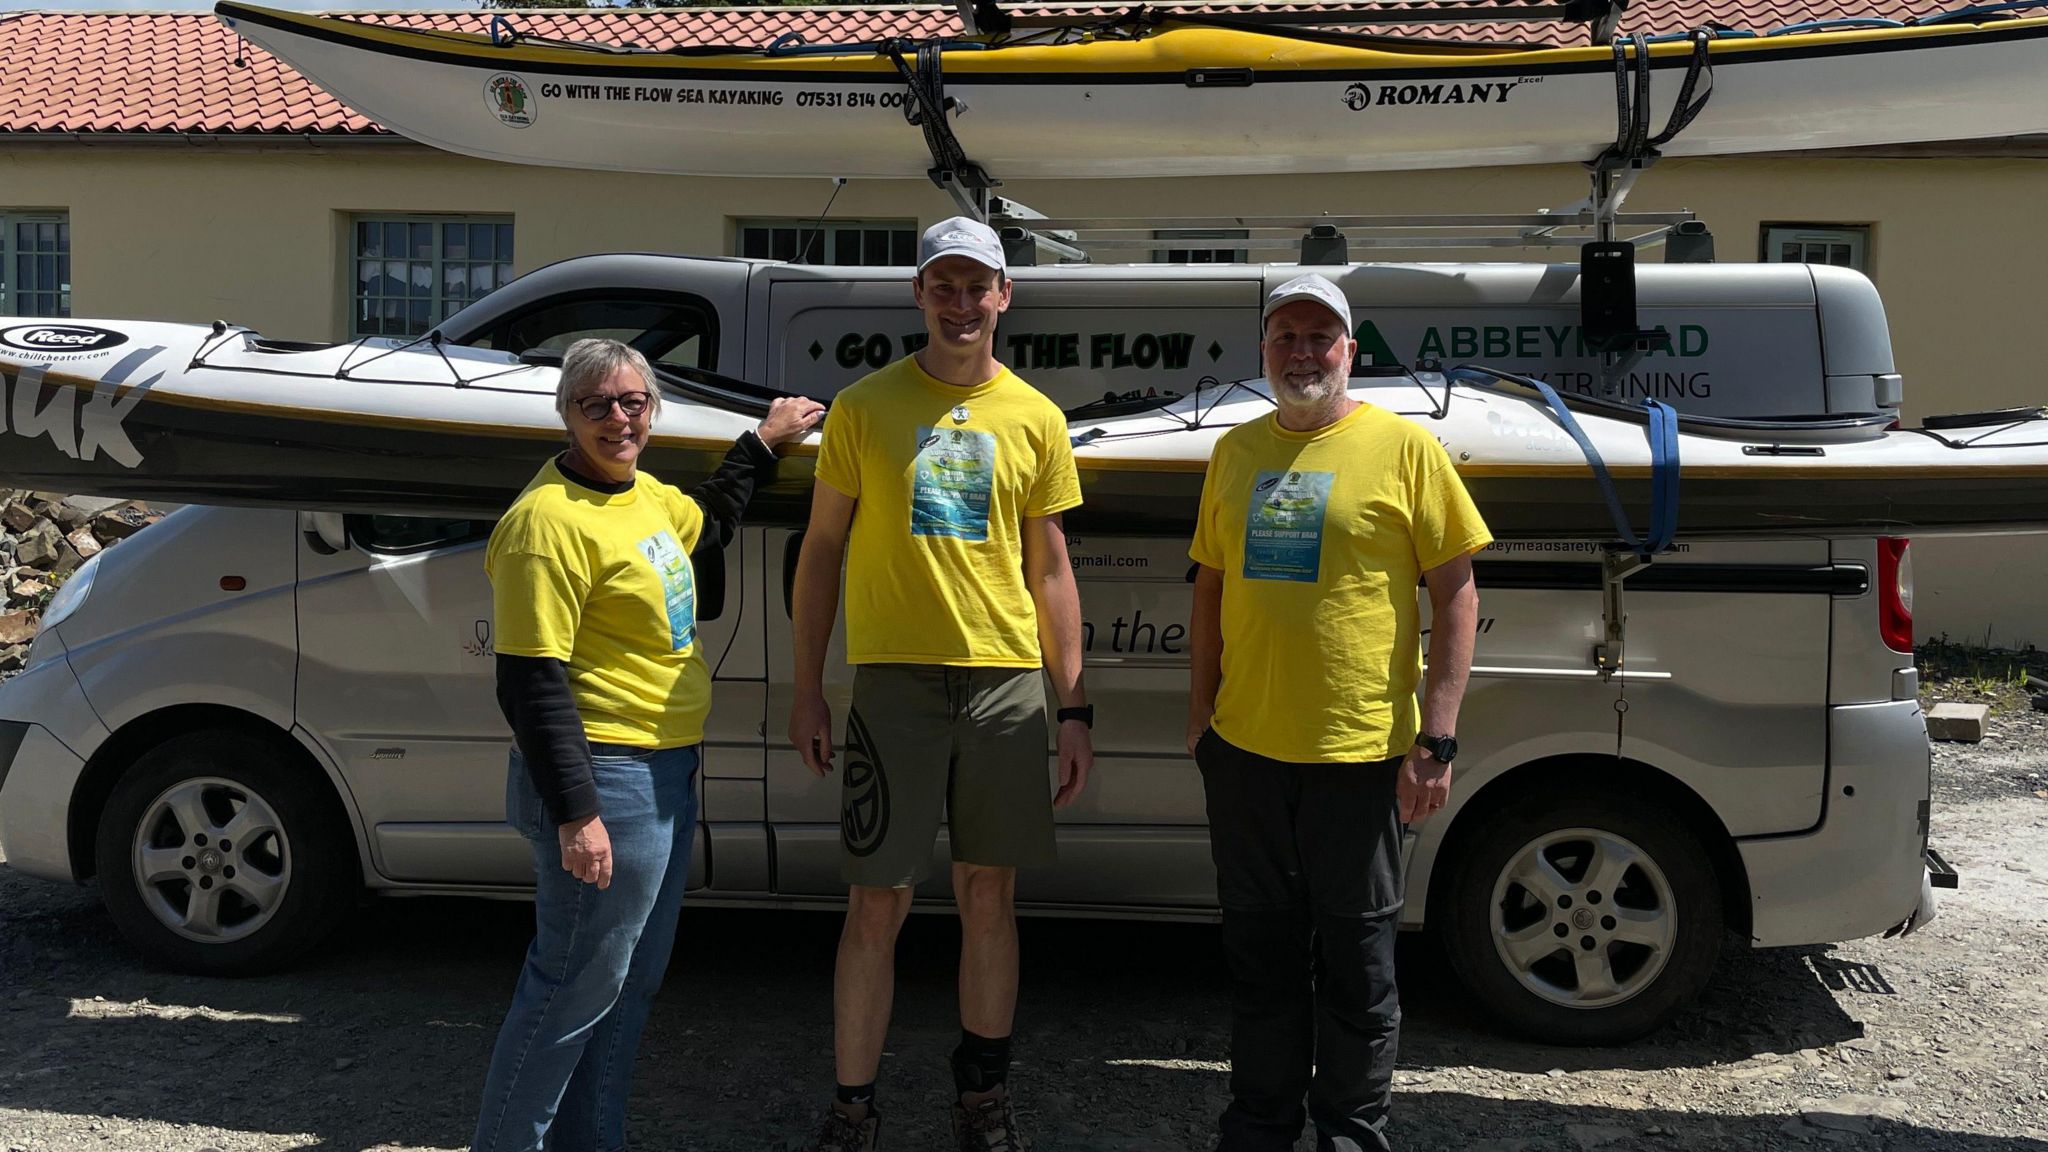 Brad, his mum, and his coach stand in front of the kayak that will take them to Lundy.